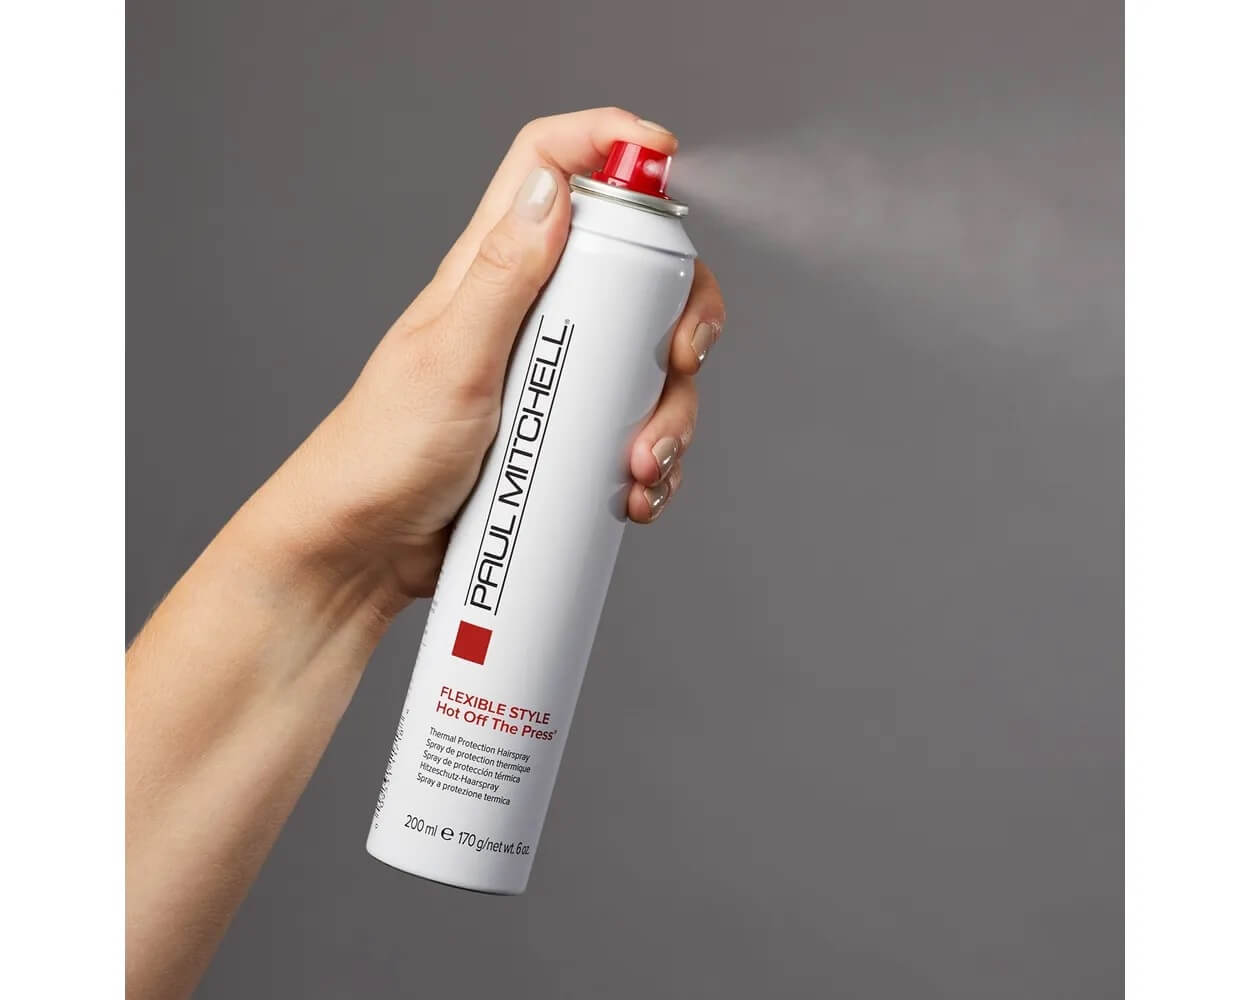 Paul Mitchell Flexible Style Hot Off The Press Thermal Protection Hairspray 200ml - Salon Style